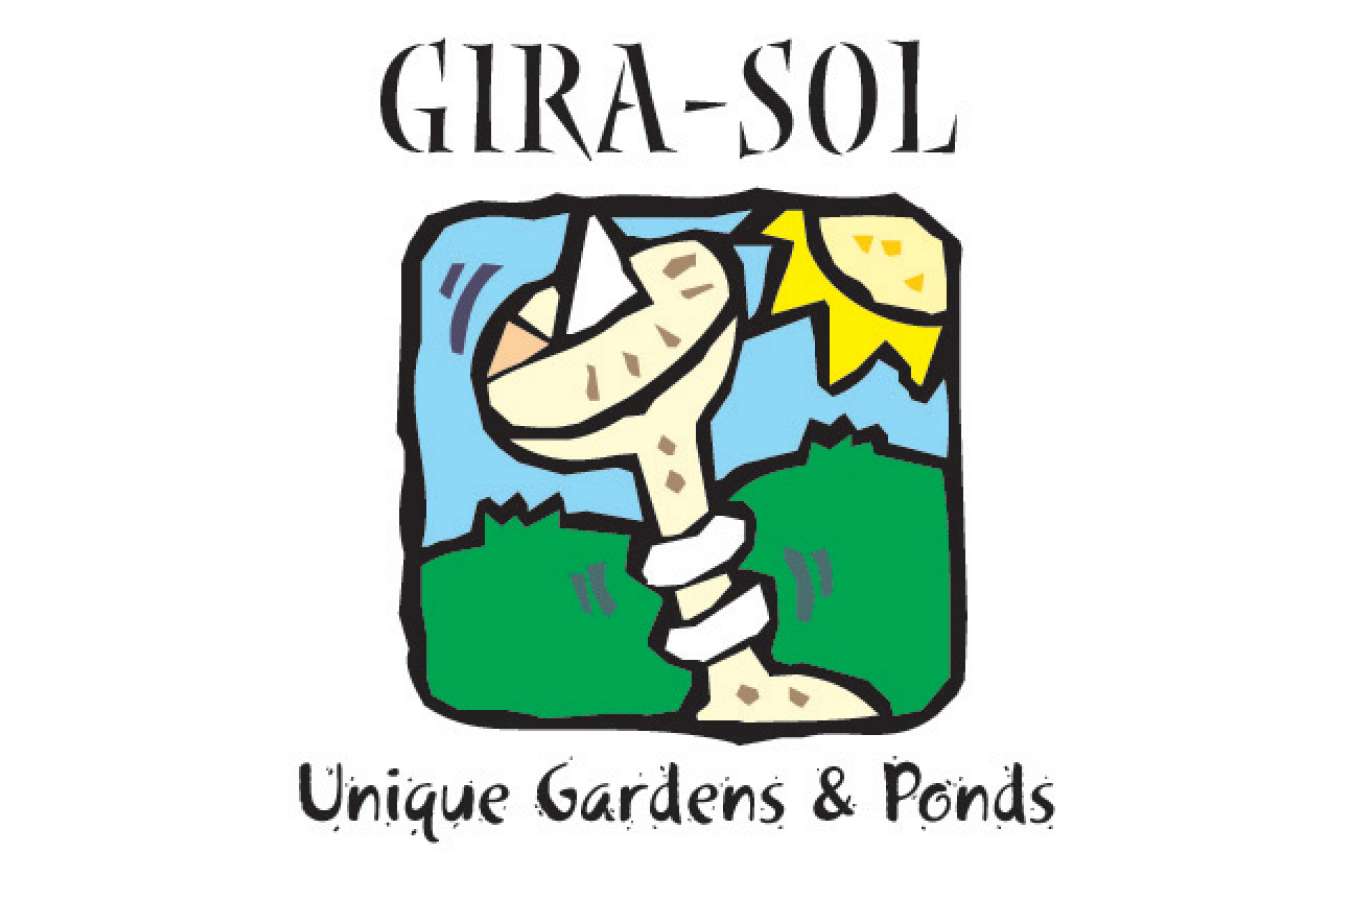 Logo 13 : Girasol means "sundial" and "sunflower" in Portuguese and are featured in company logo & identity